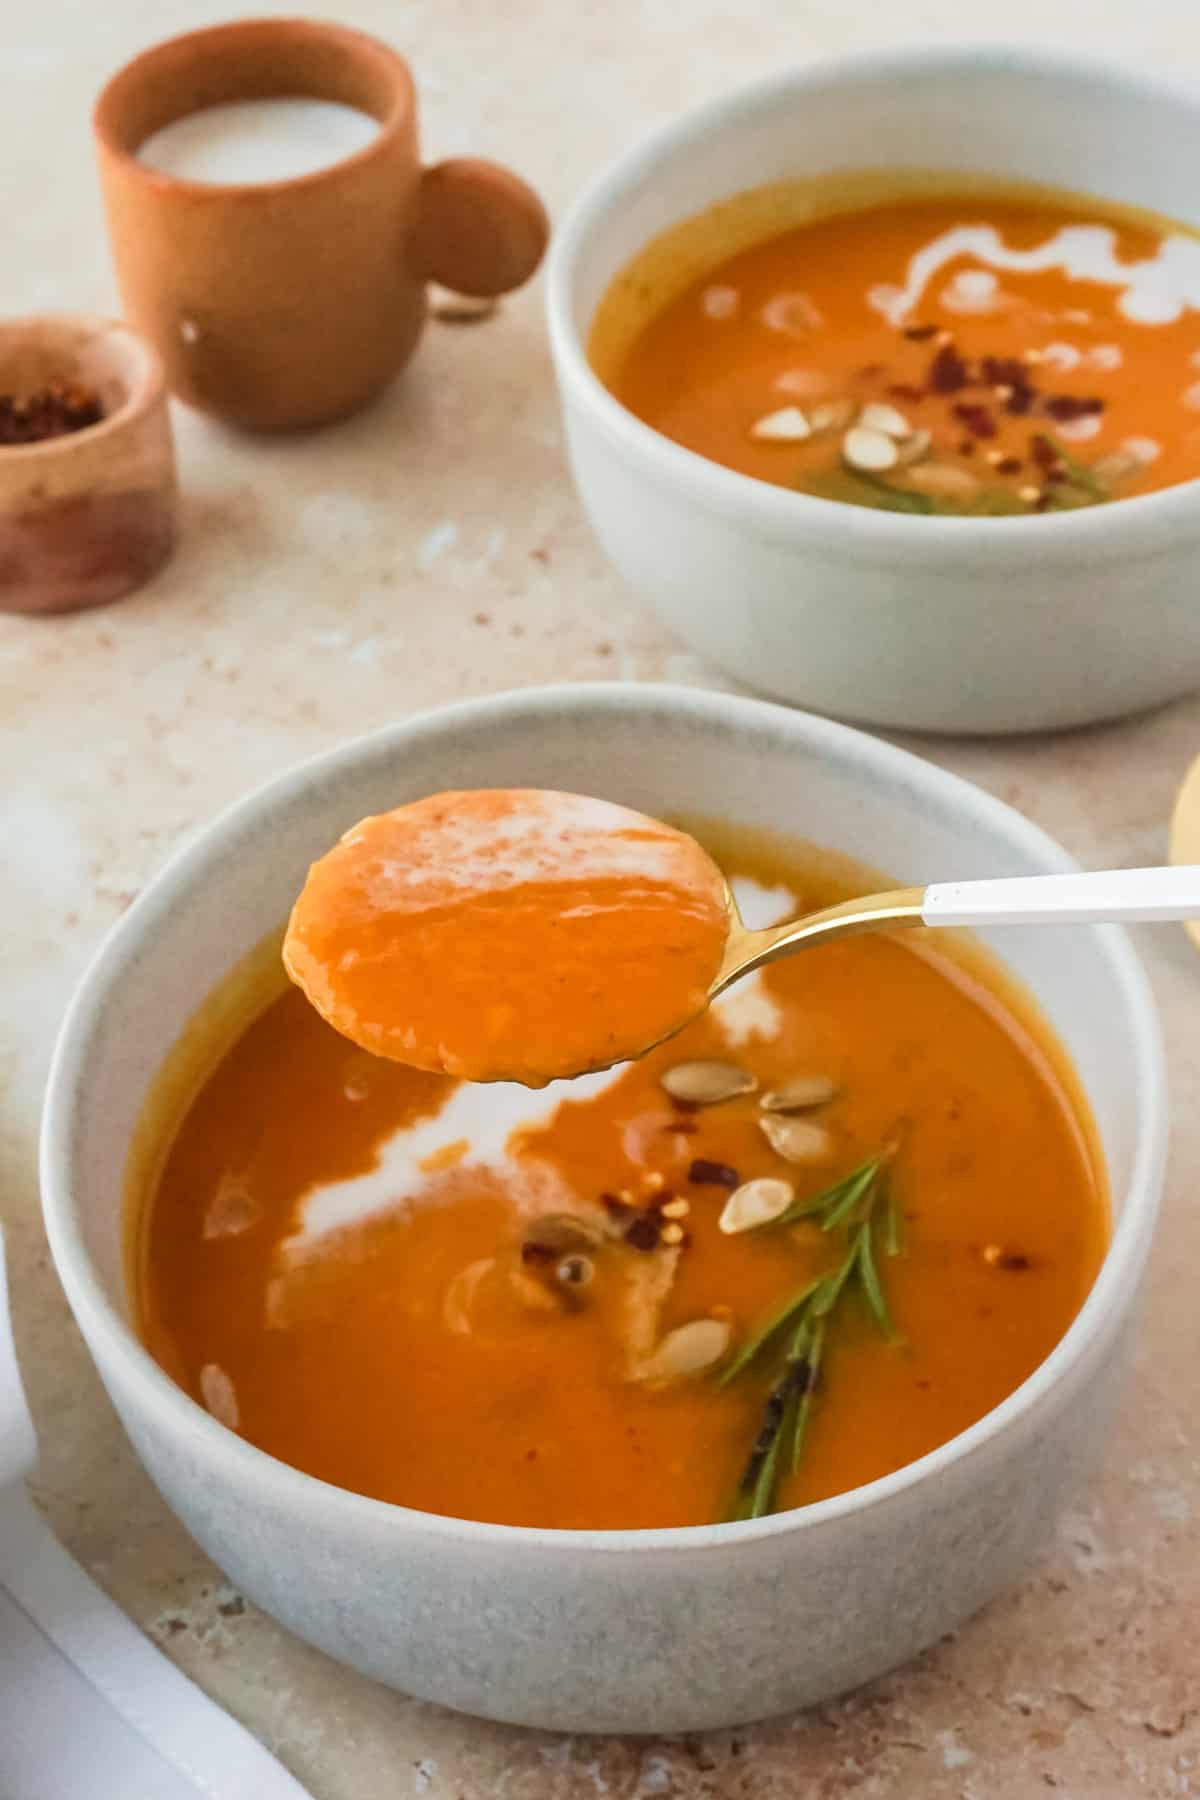 A spoonful full of soup with soups in the background.